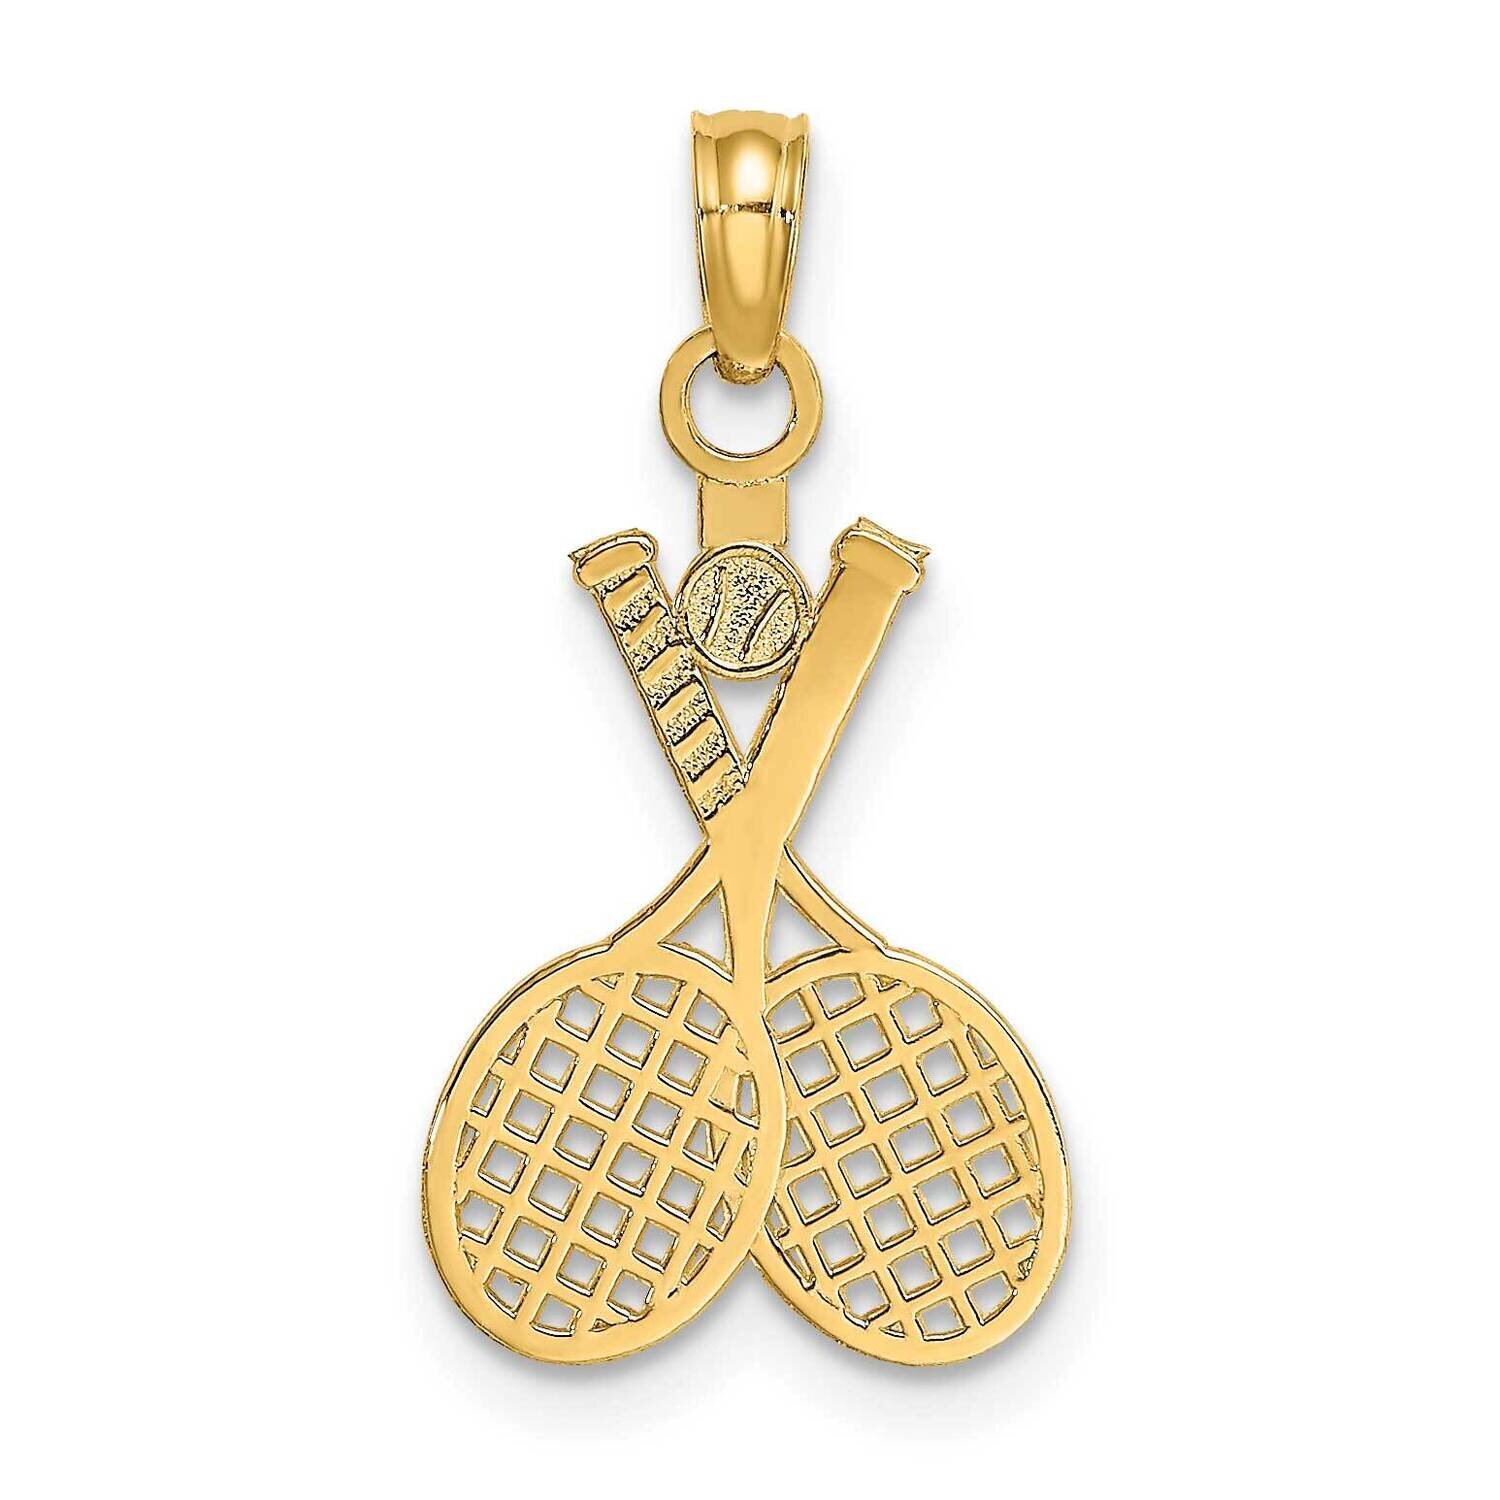 Double Tennis Racket with Ball Charm 14k Gold K8779